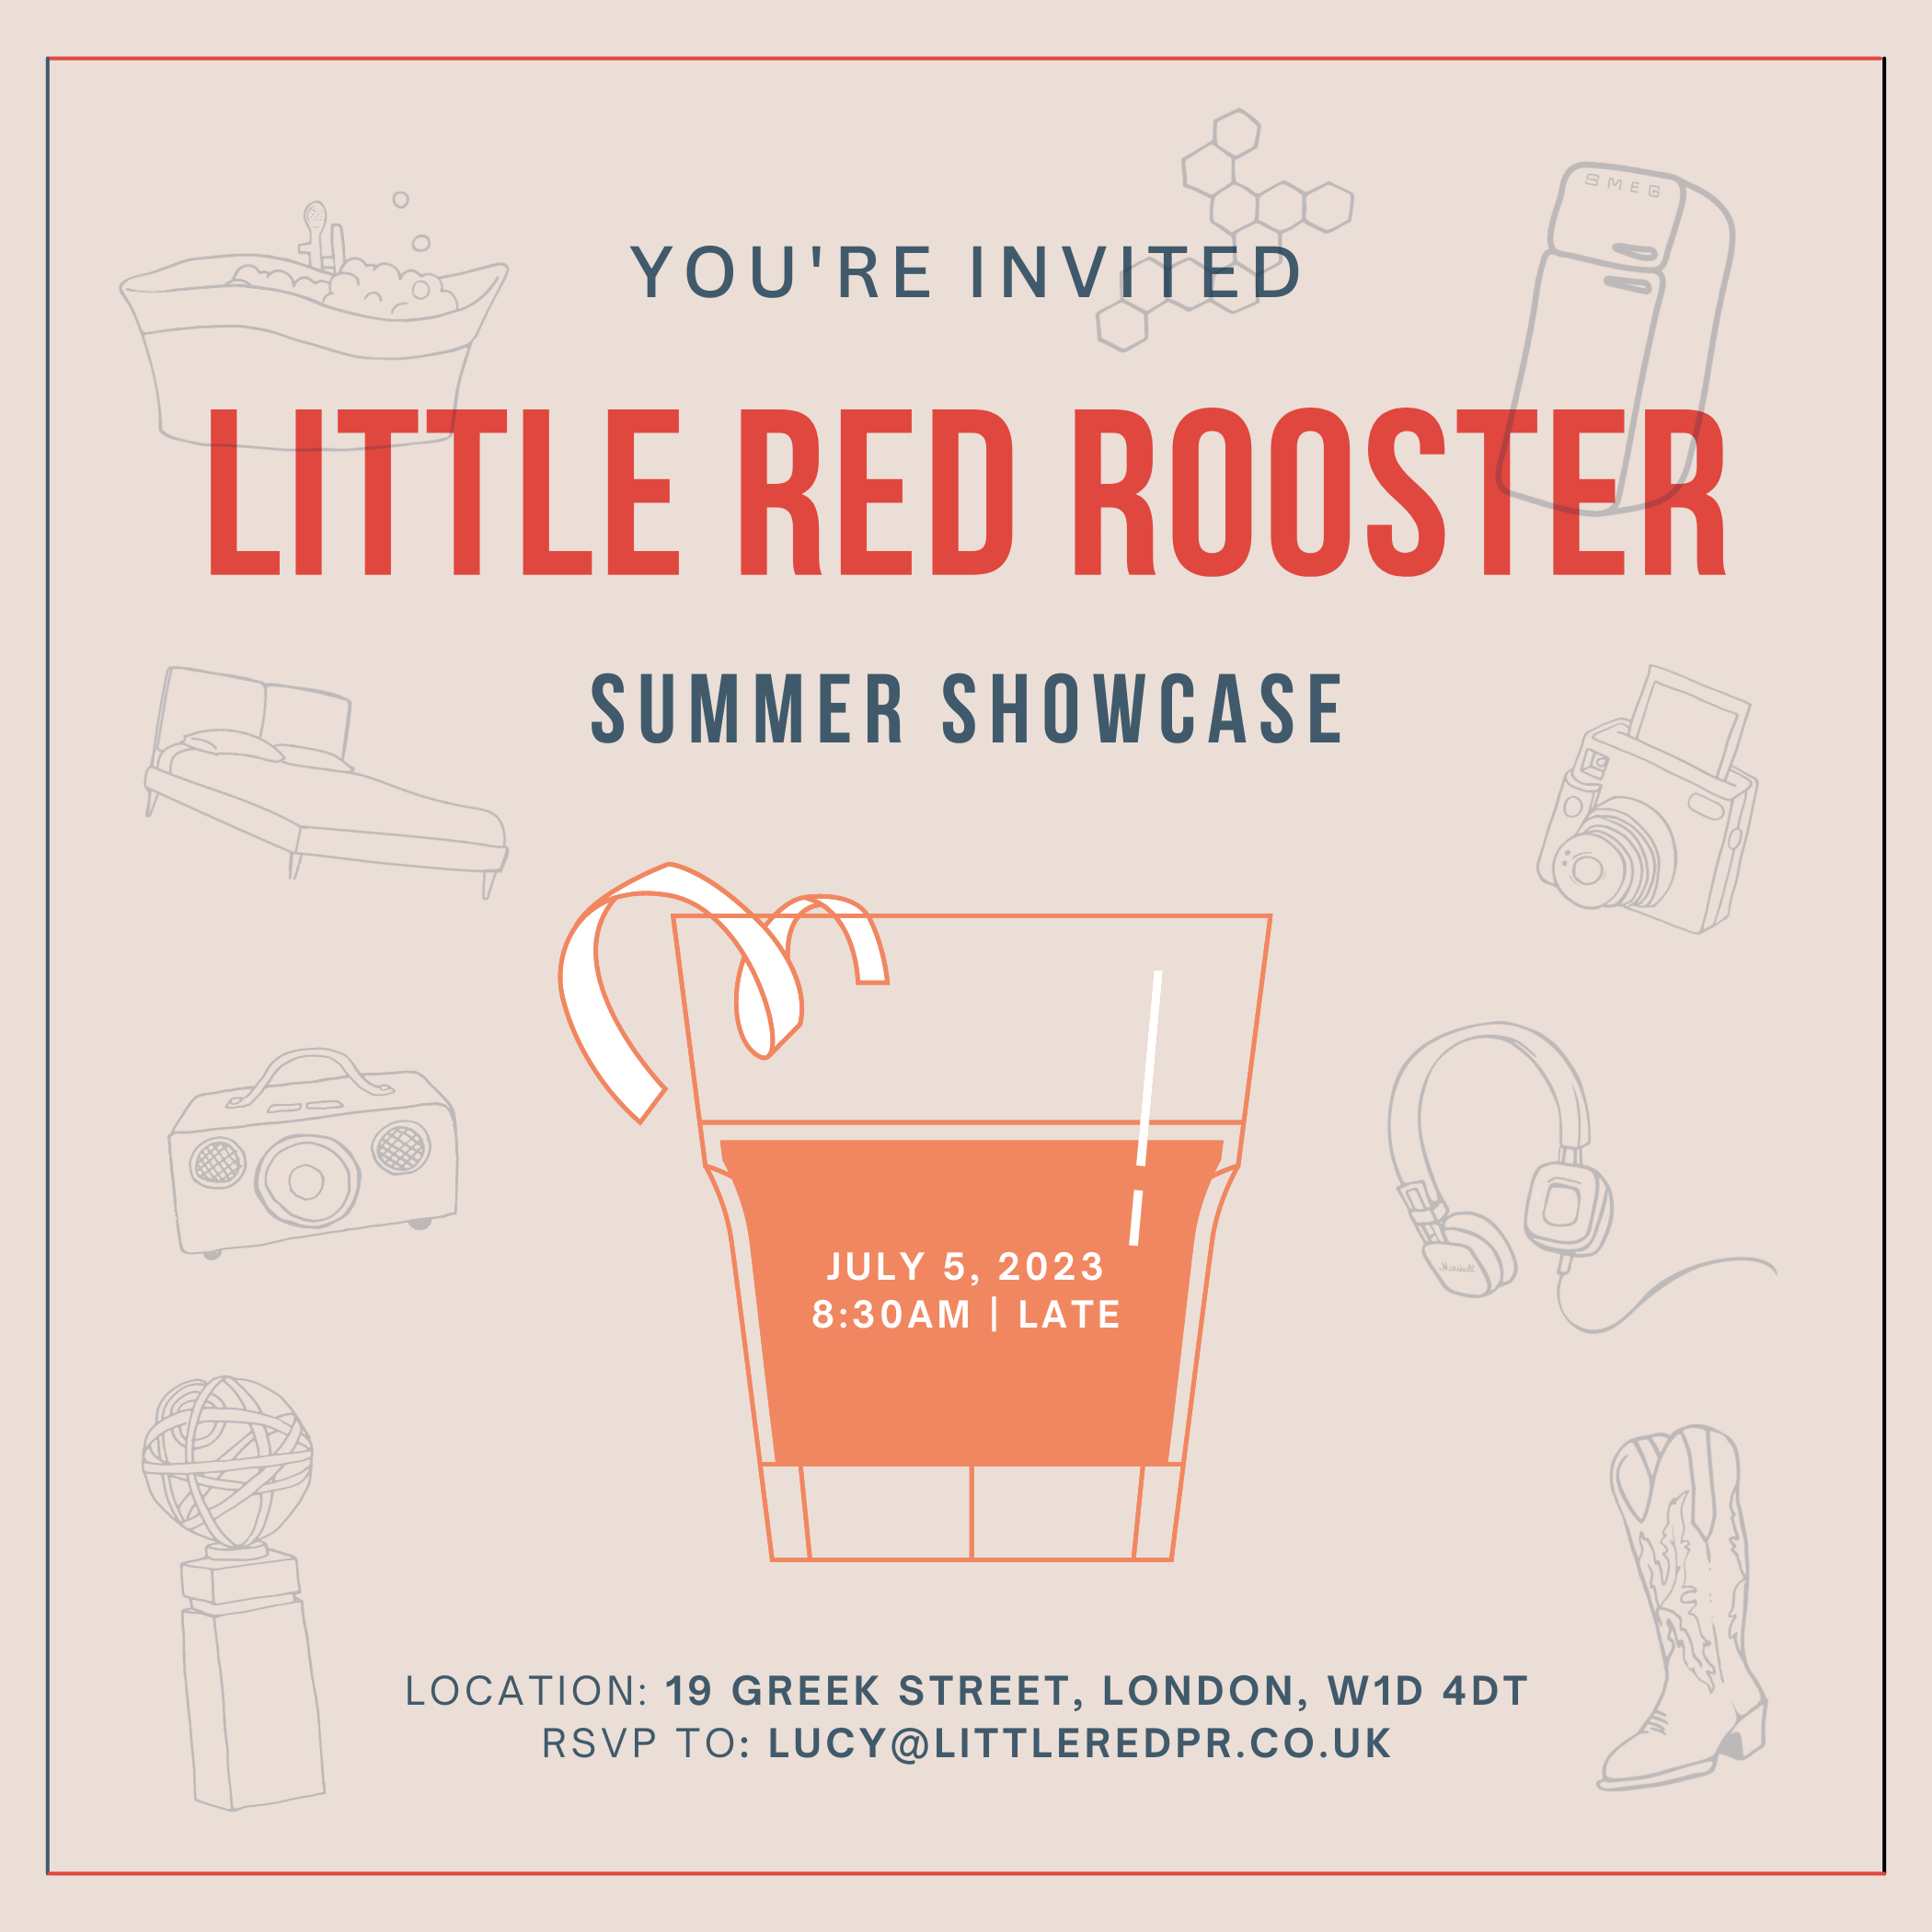 Red Rooster Summer Showcase 2023